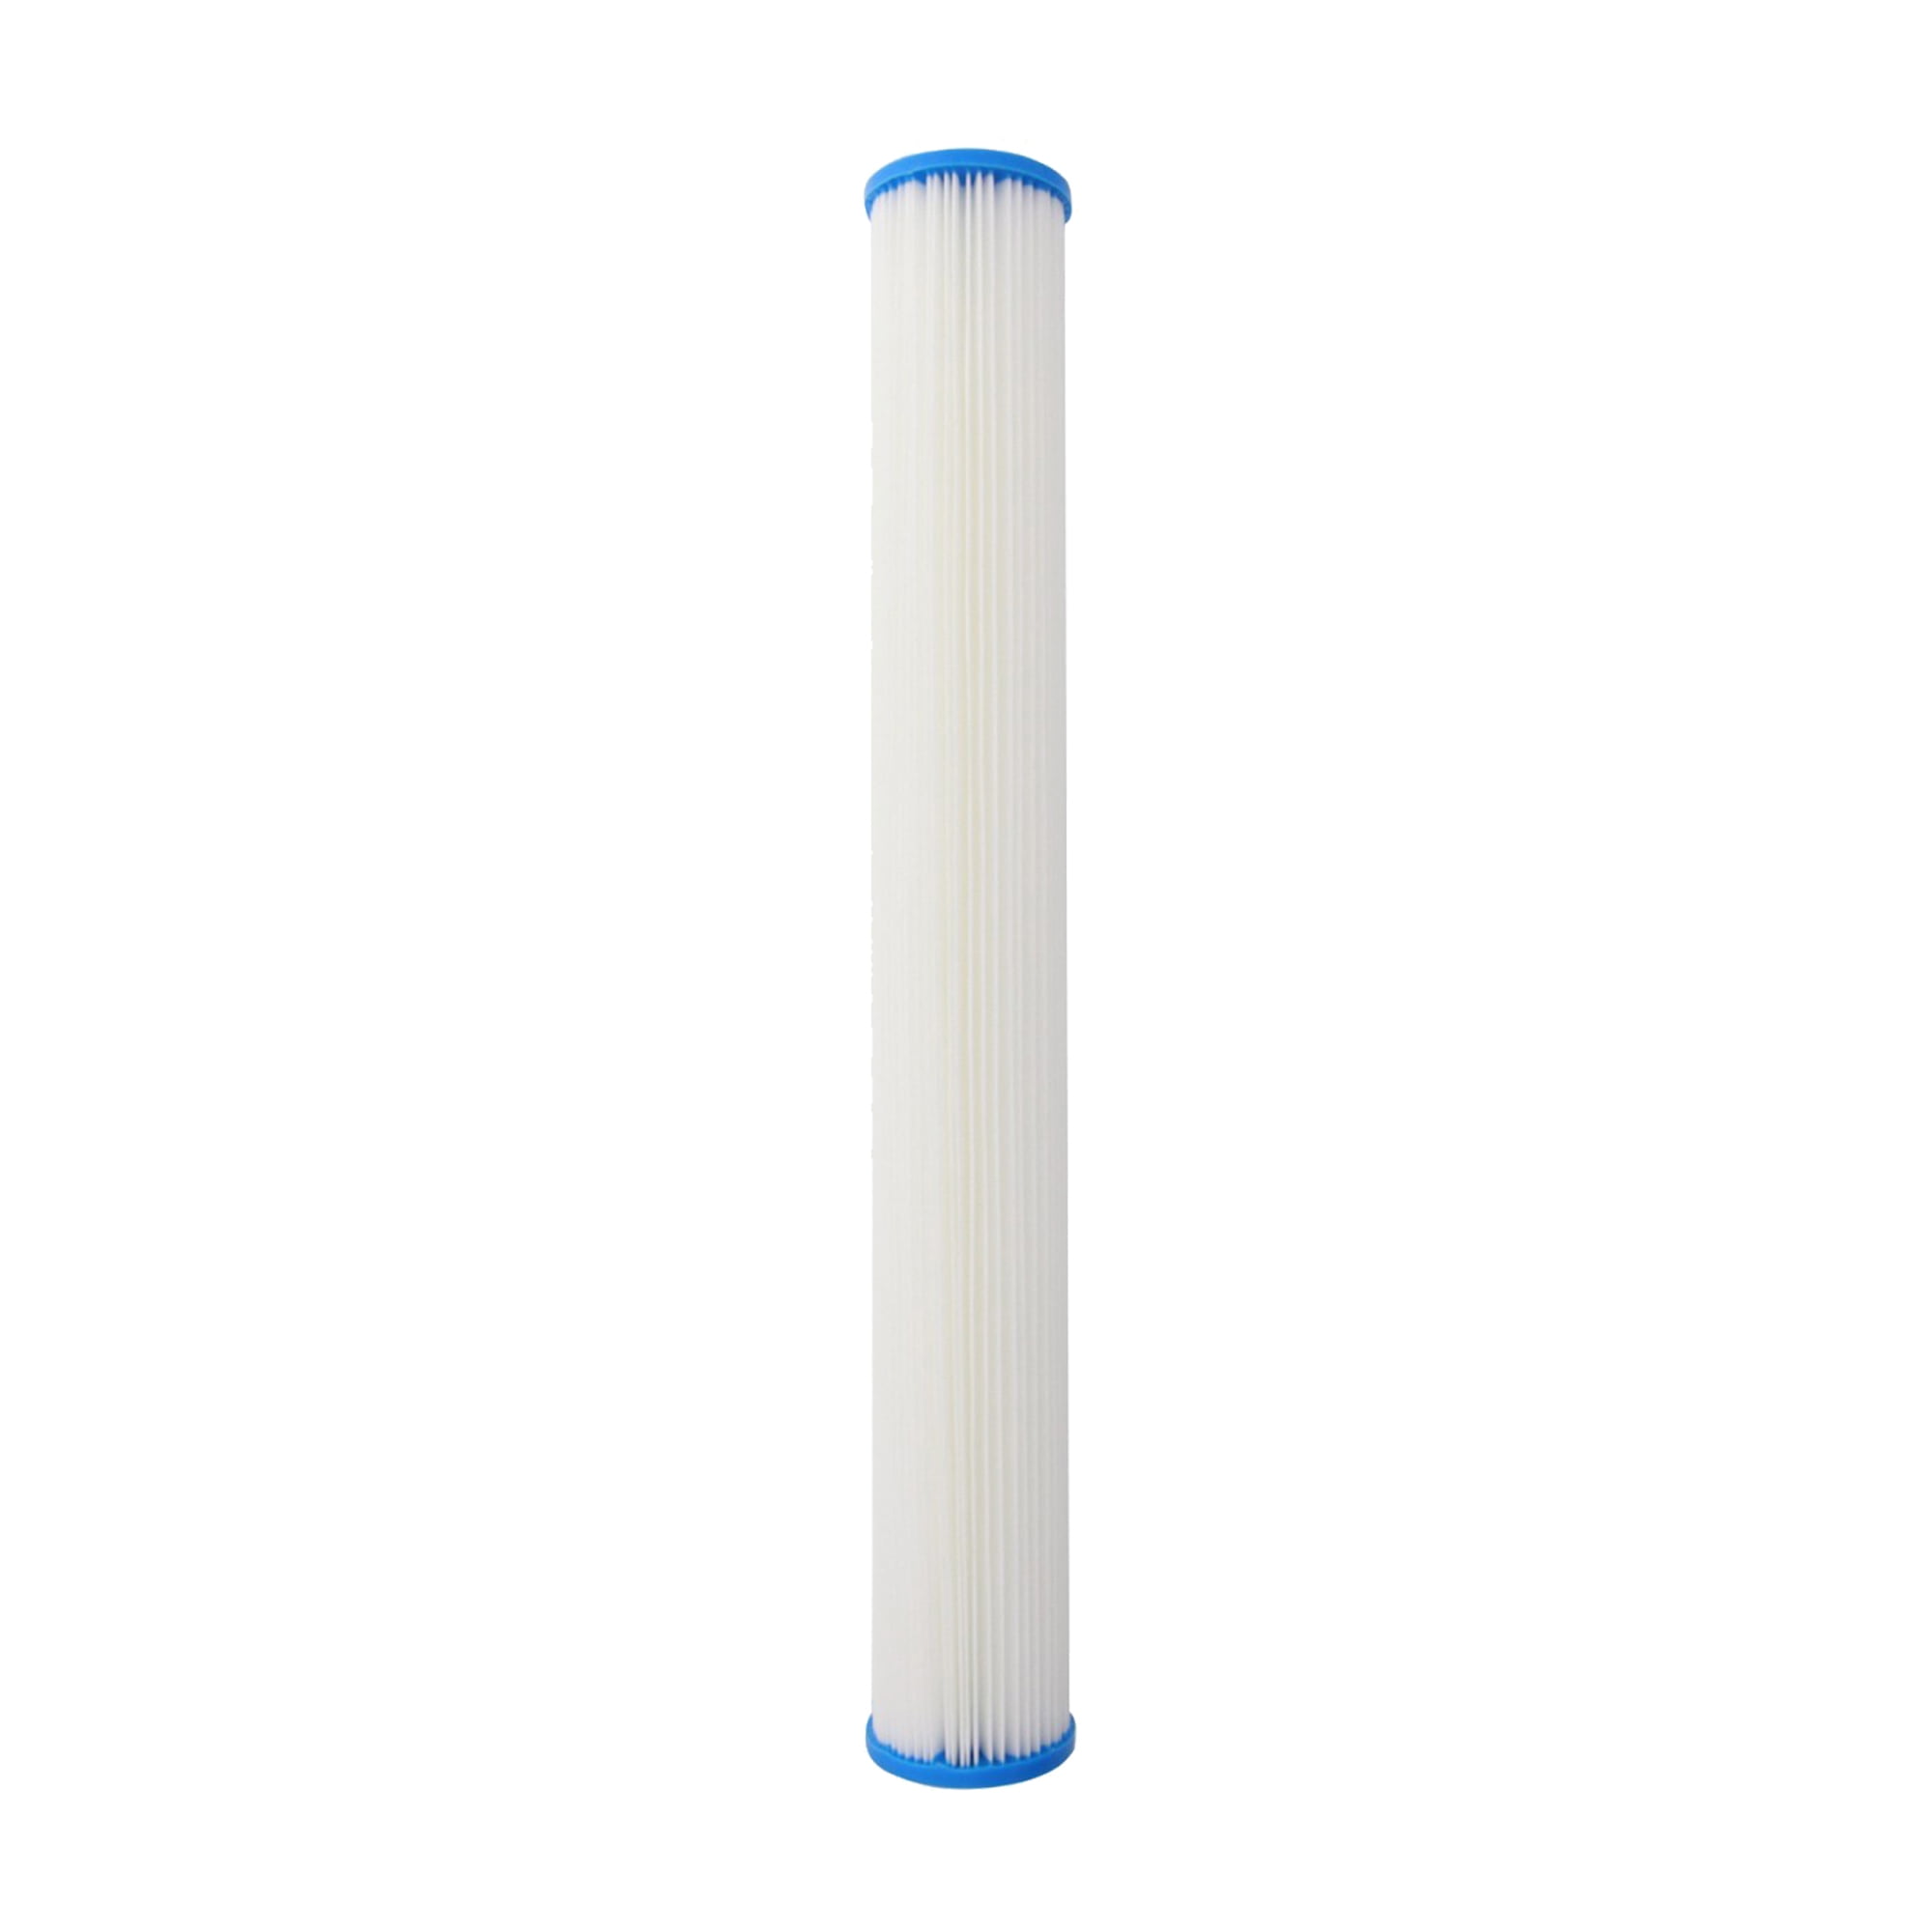 2 Pcs 20 " X 2.5 " Pleated Sediment & Carbon Water Filter Replacement RO Home 